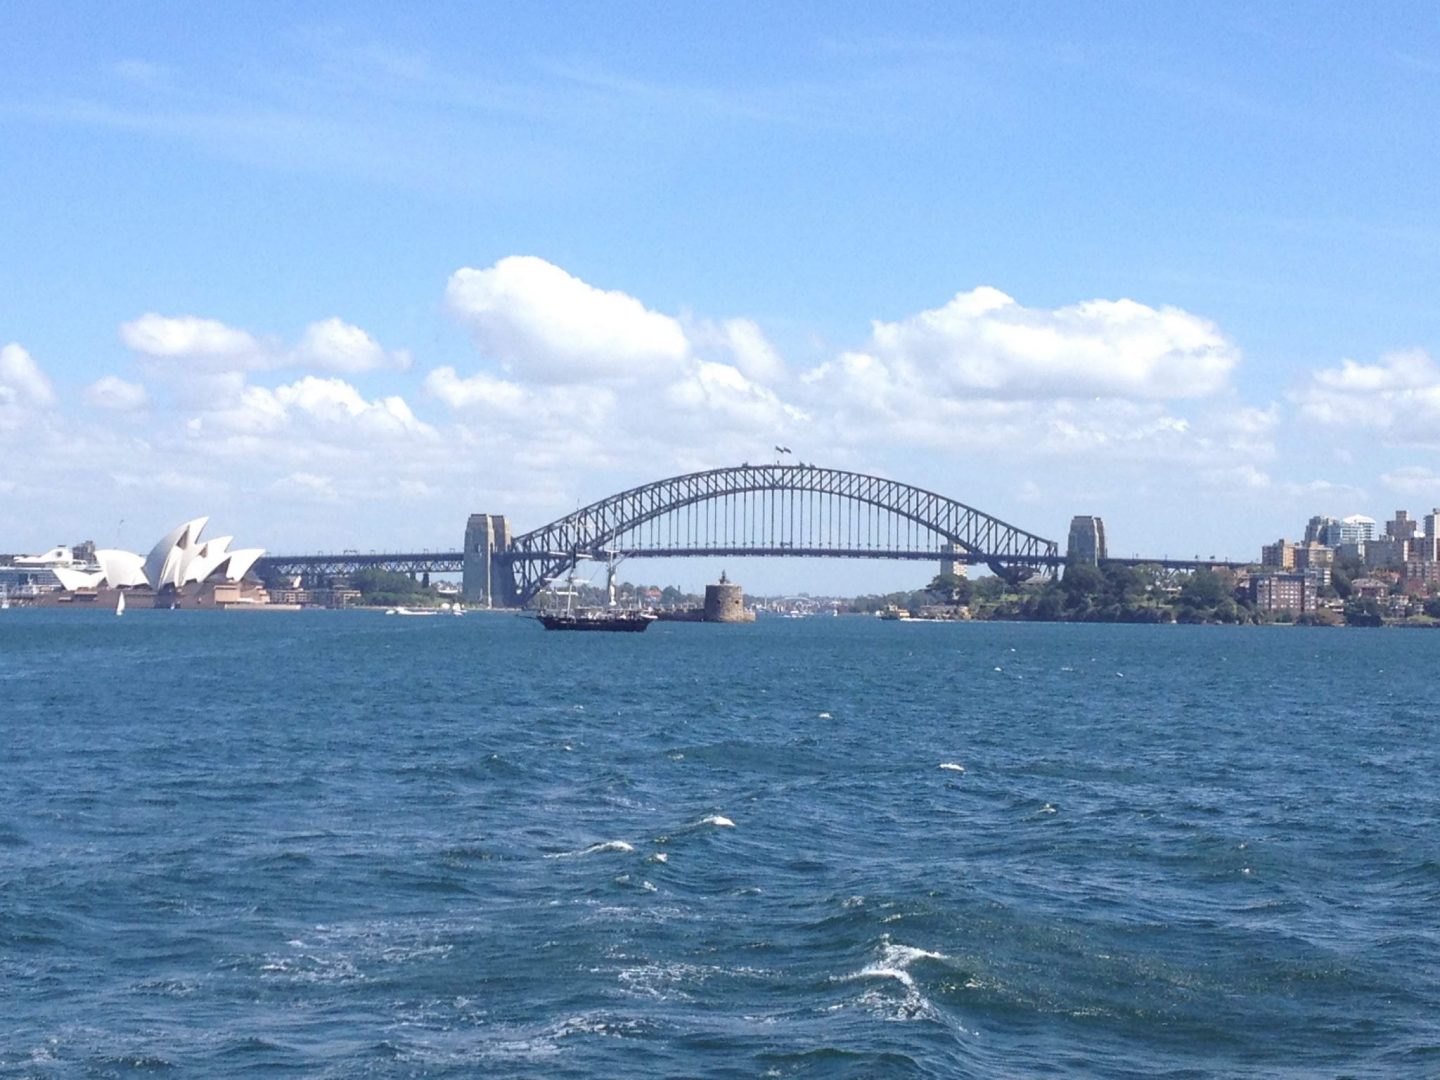 Sydney Harbour from Manly Ferry